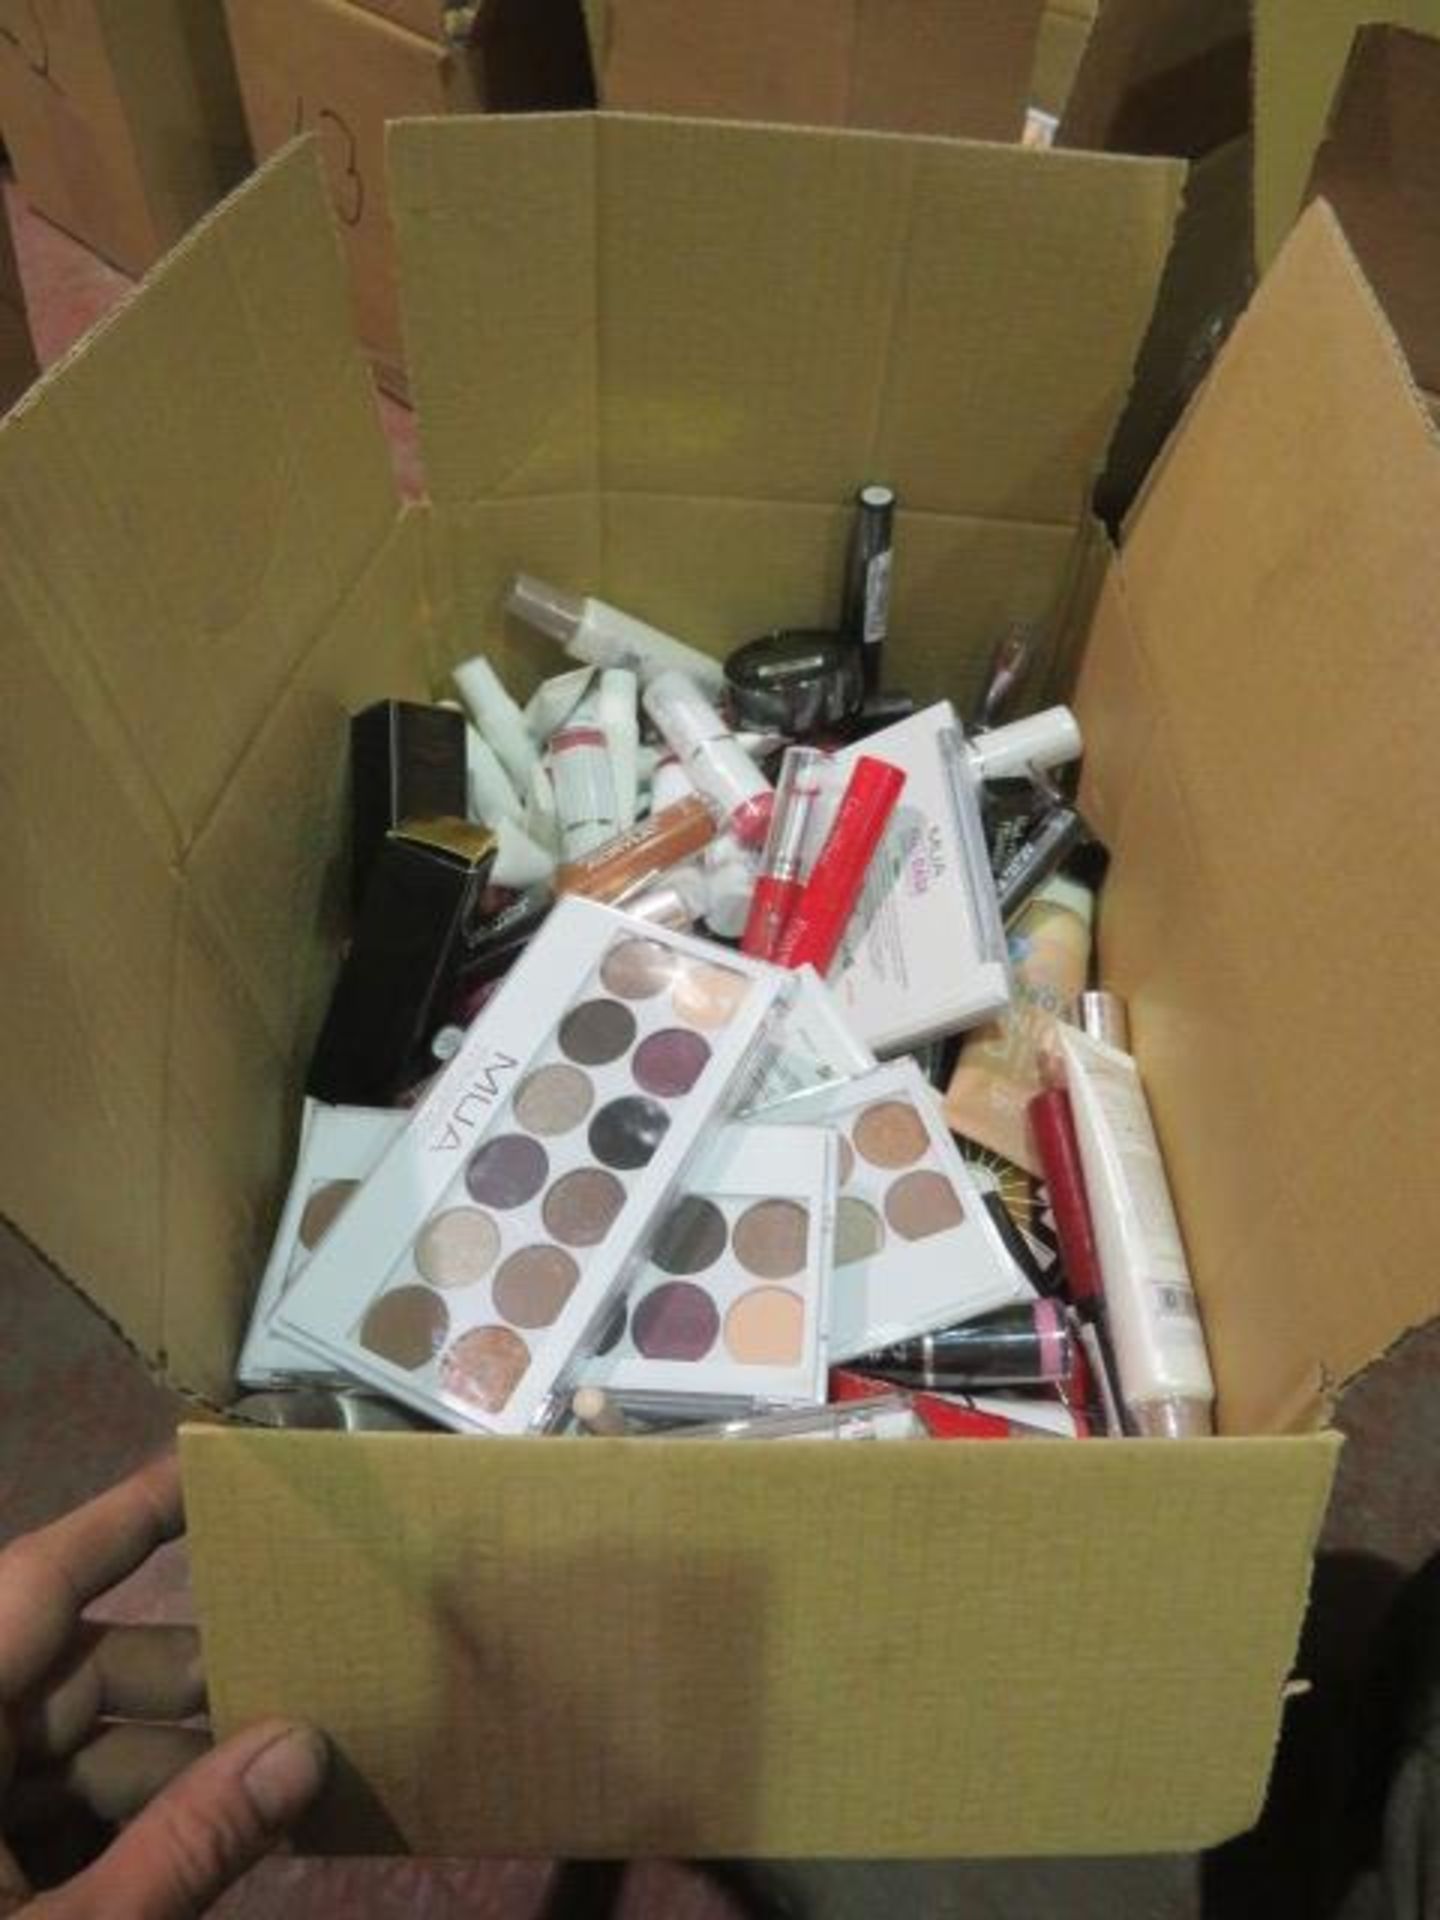 (Z65) Circa. 200 items of various new make up acadamy make up to include: skin define hydro fou...